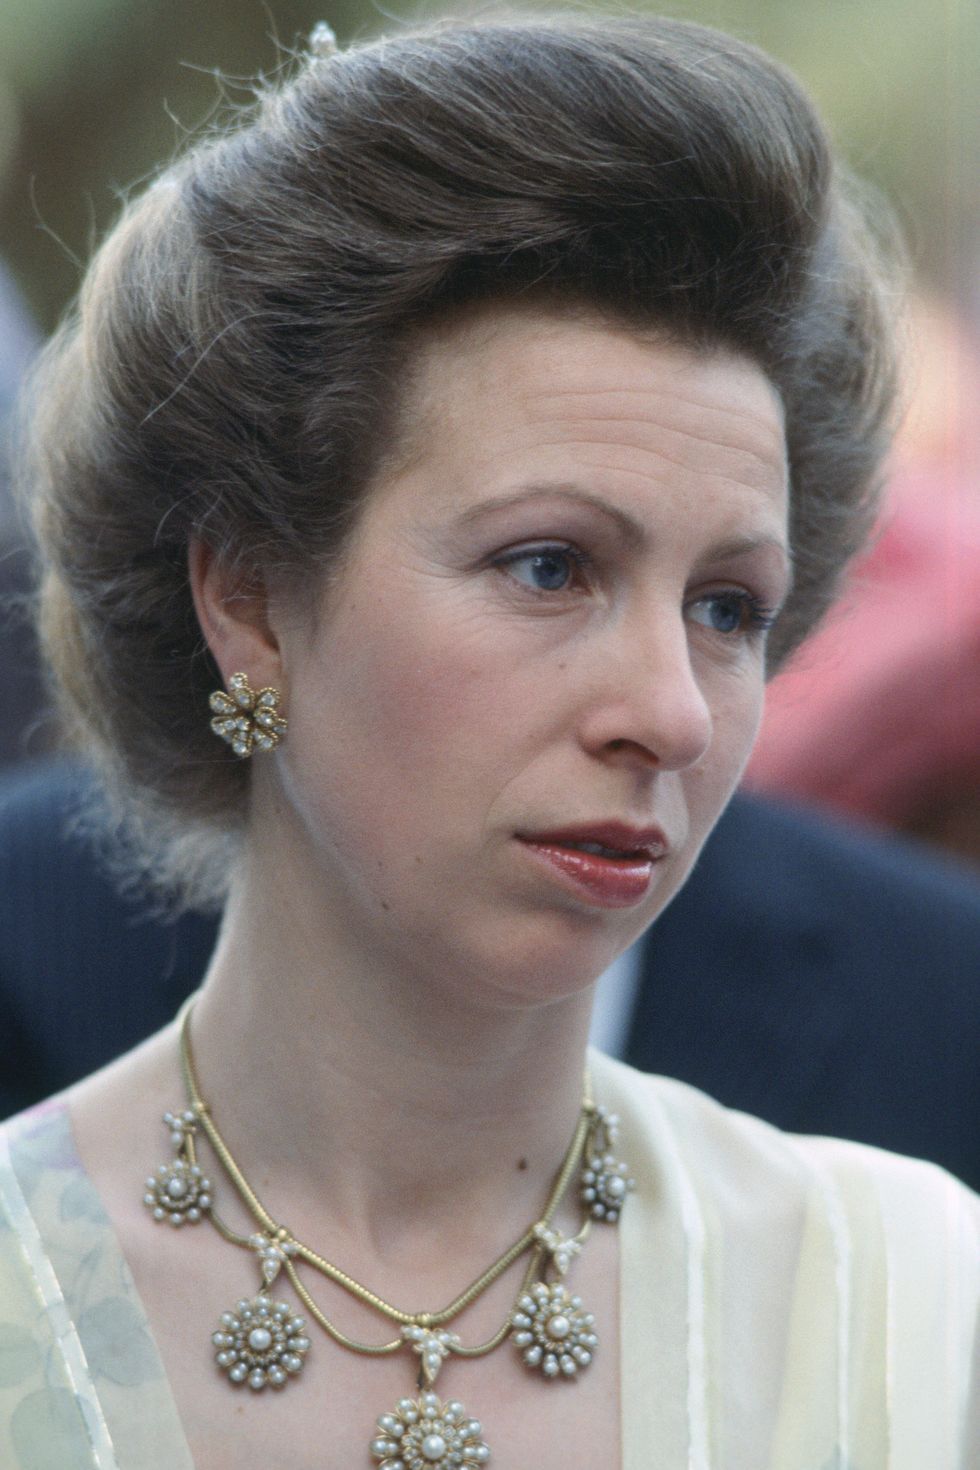 princess-anne-attending-a-banquet-in-gambia-news-photo-1590770008.jpg